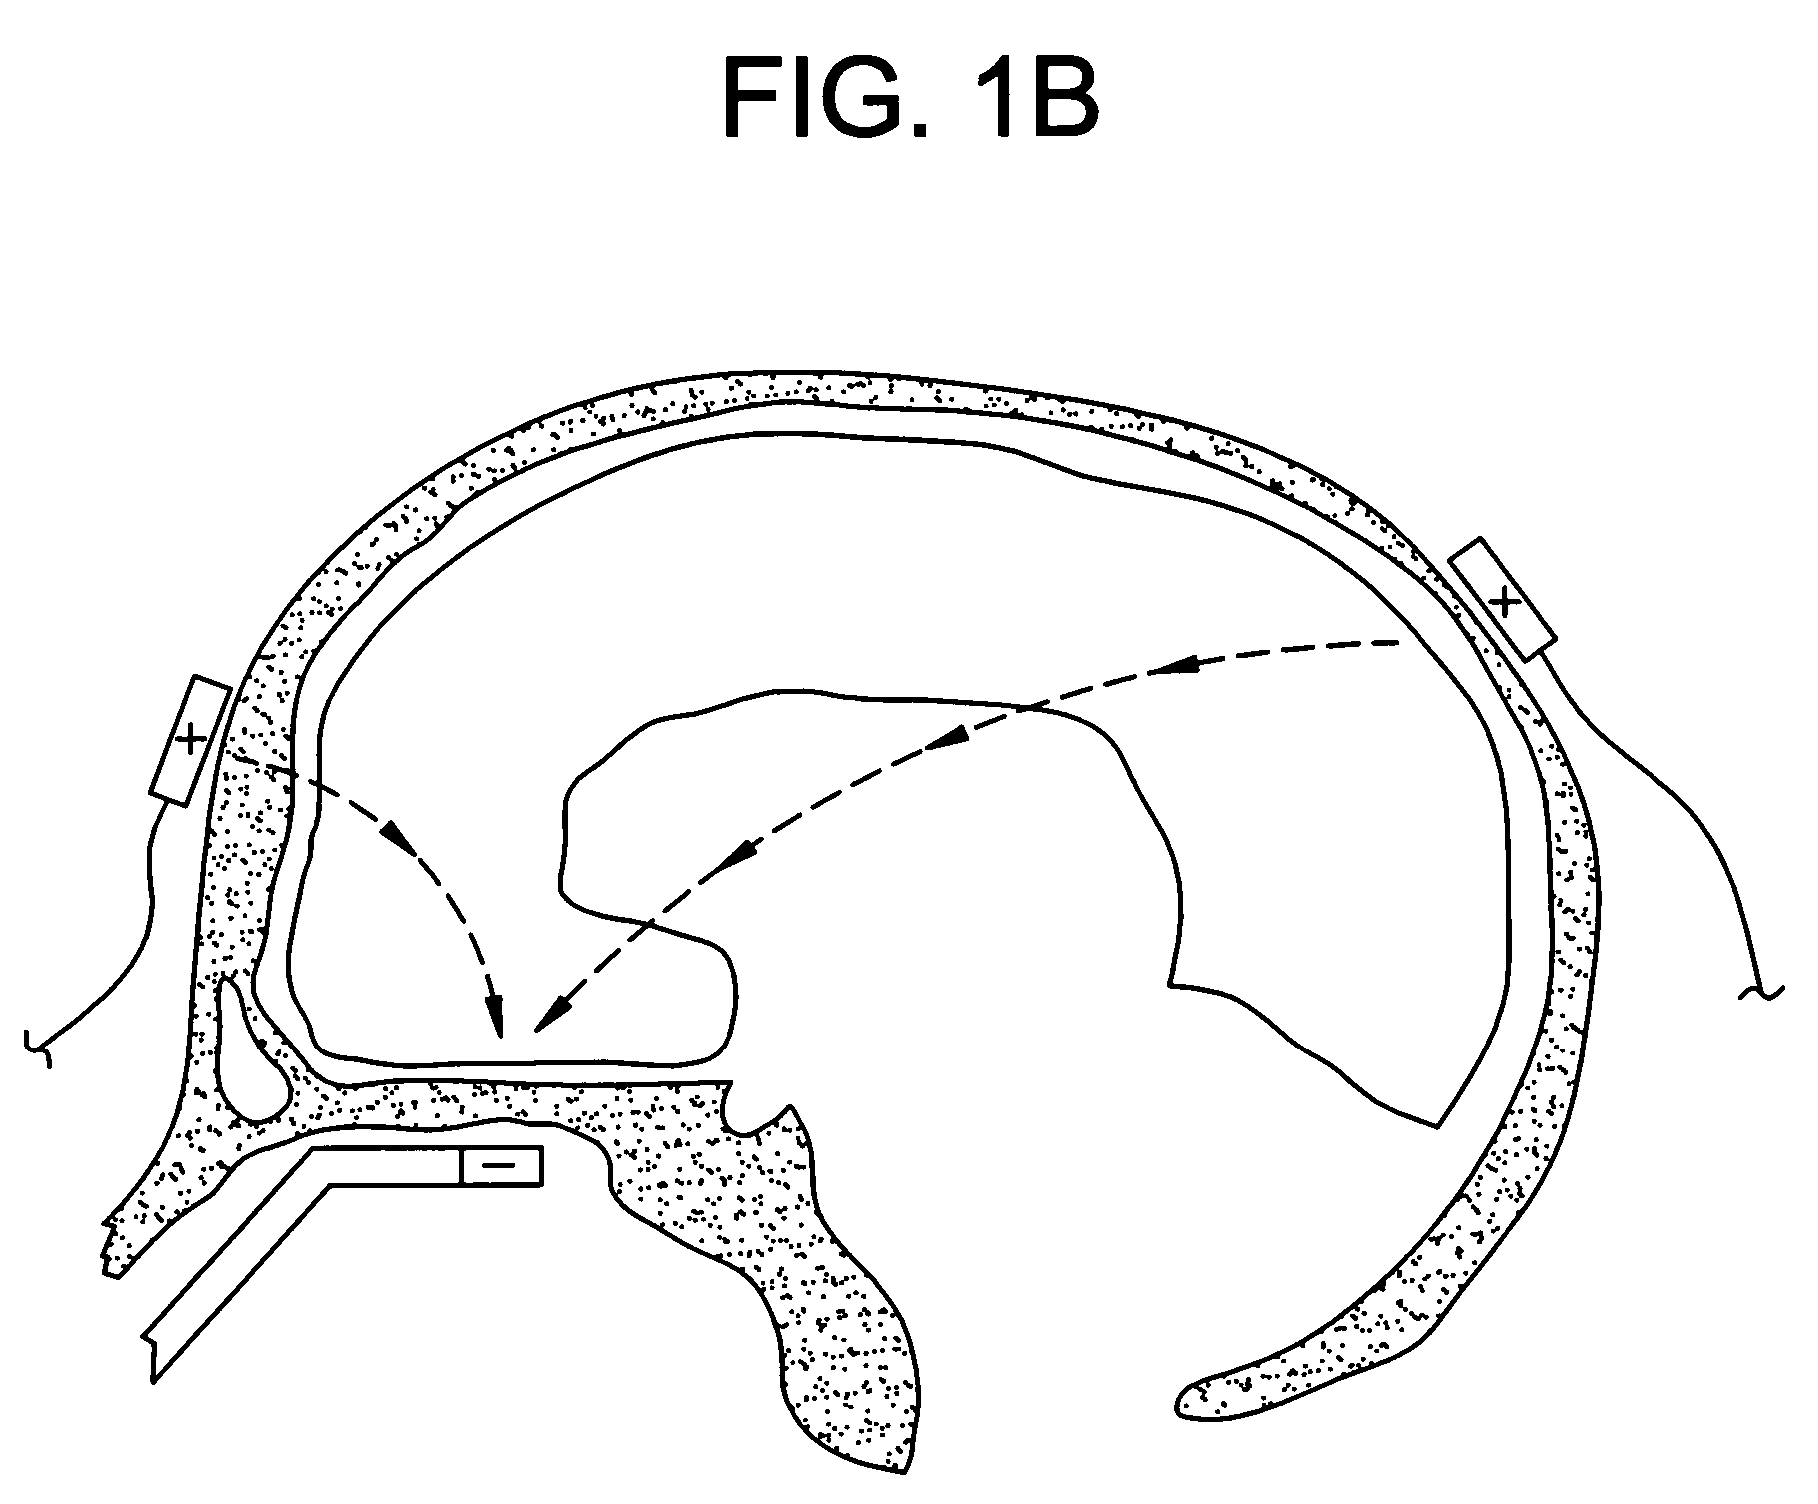 Method of removing deleterious charged molecules from brain tissue